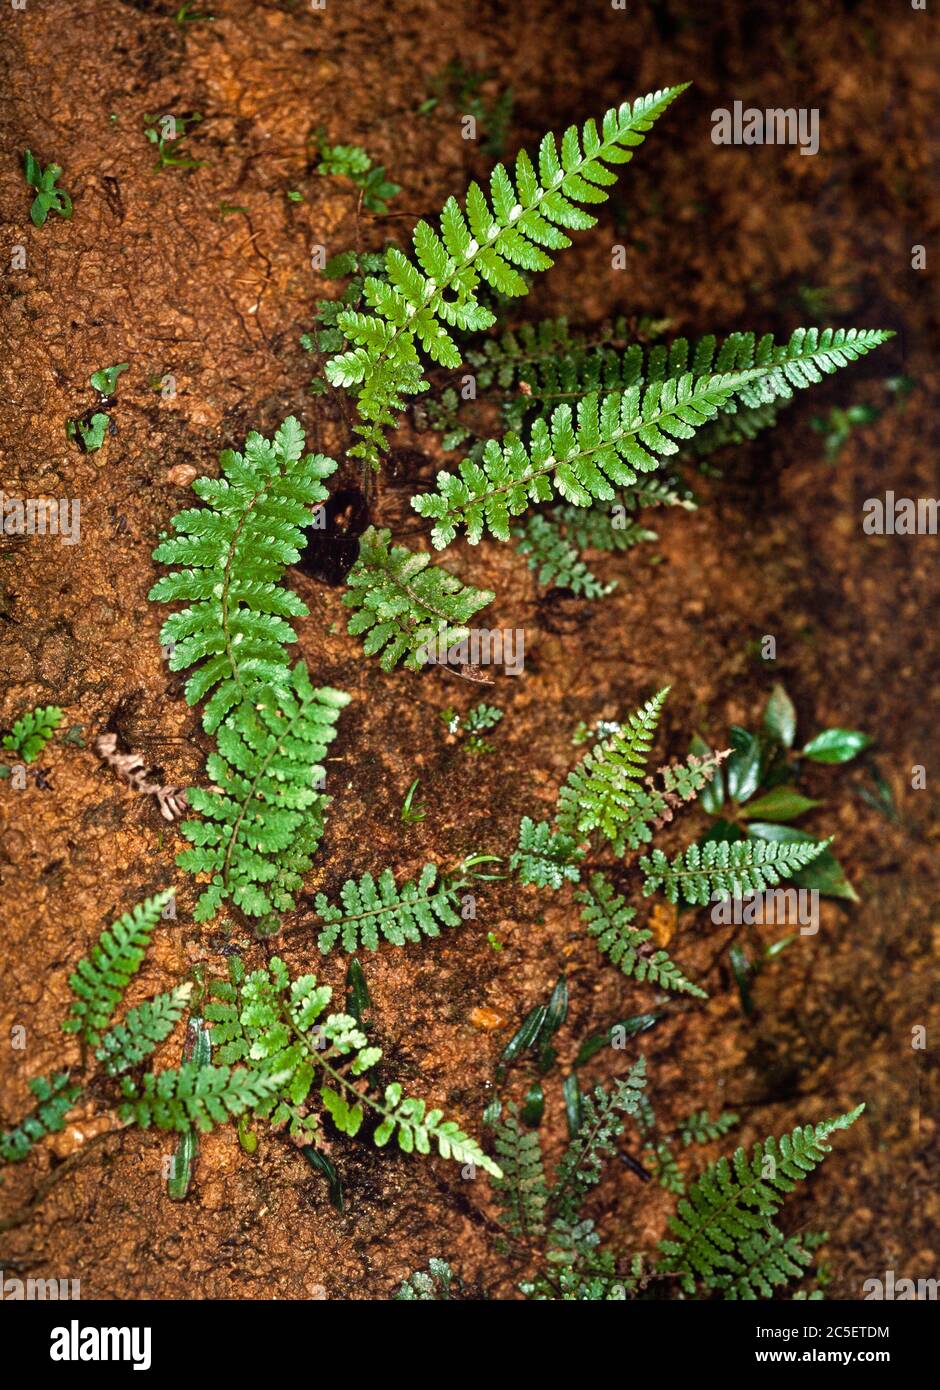 Tropical ferns growing in a rainforest, Mulu, Borneo, East Malaysia Stock Photo